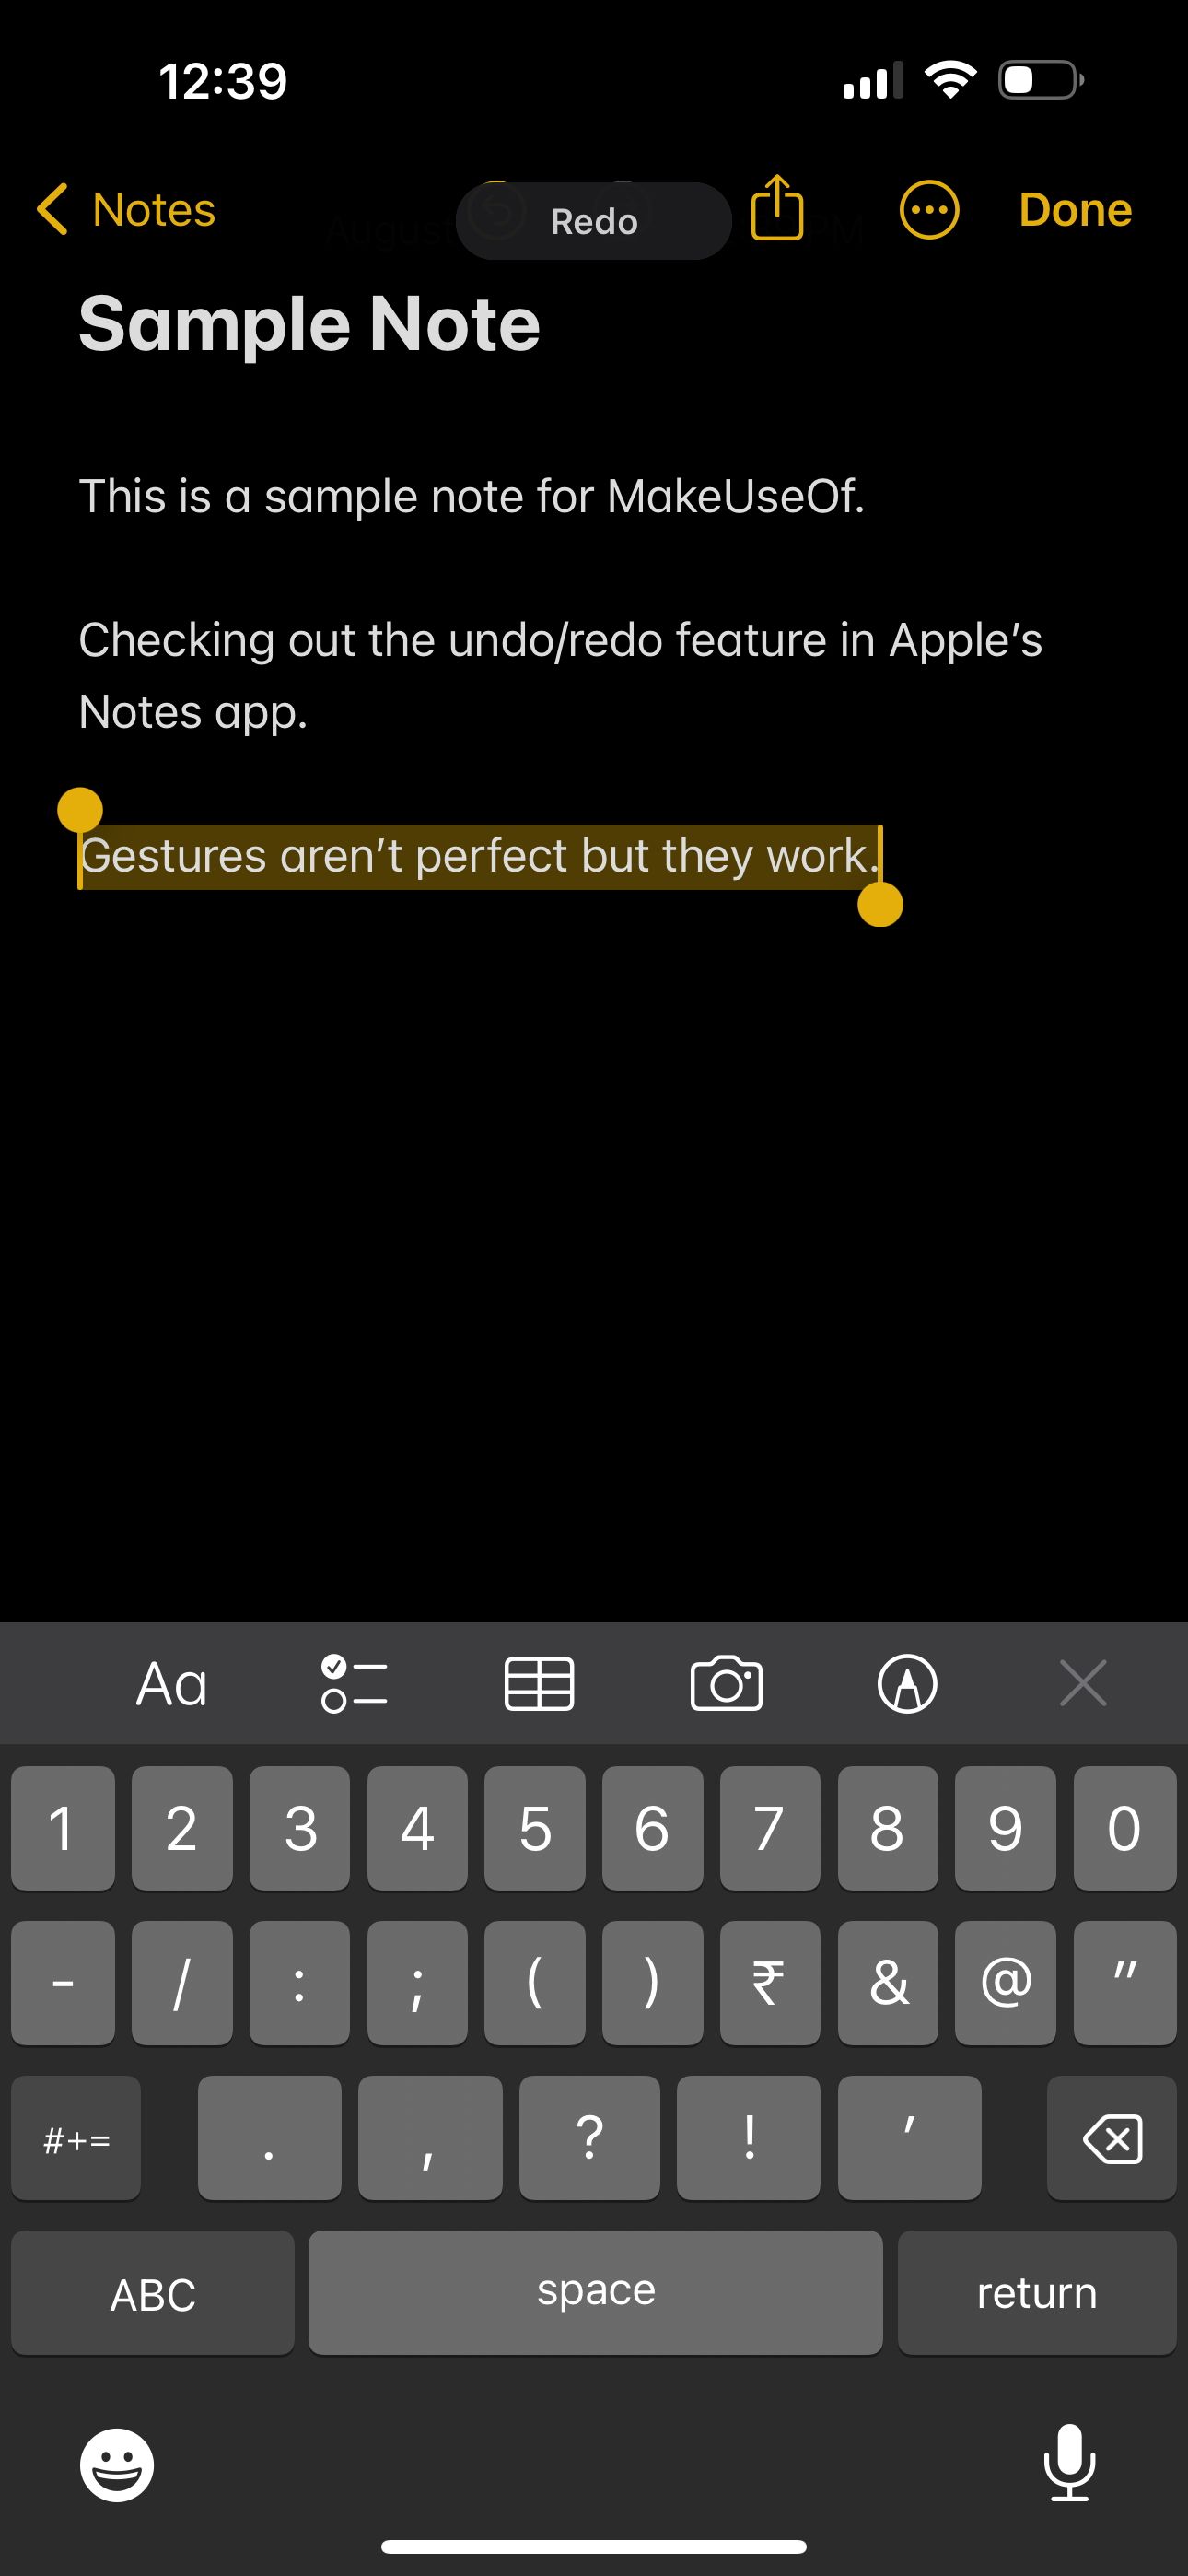 Notes app Redo with gesture